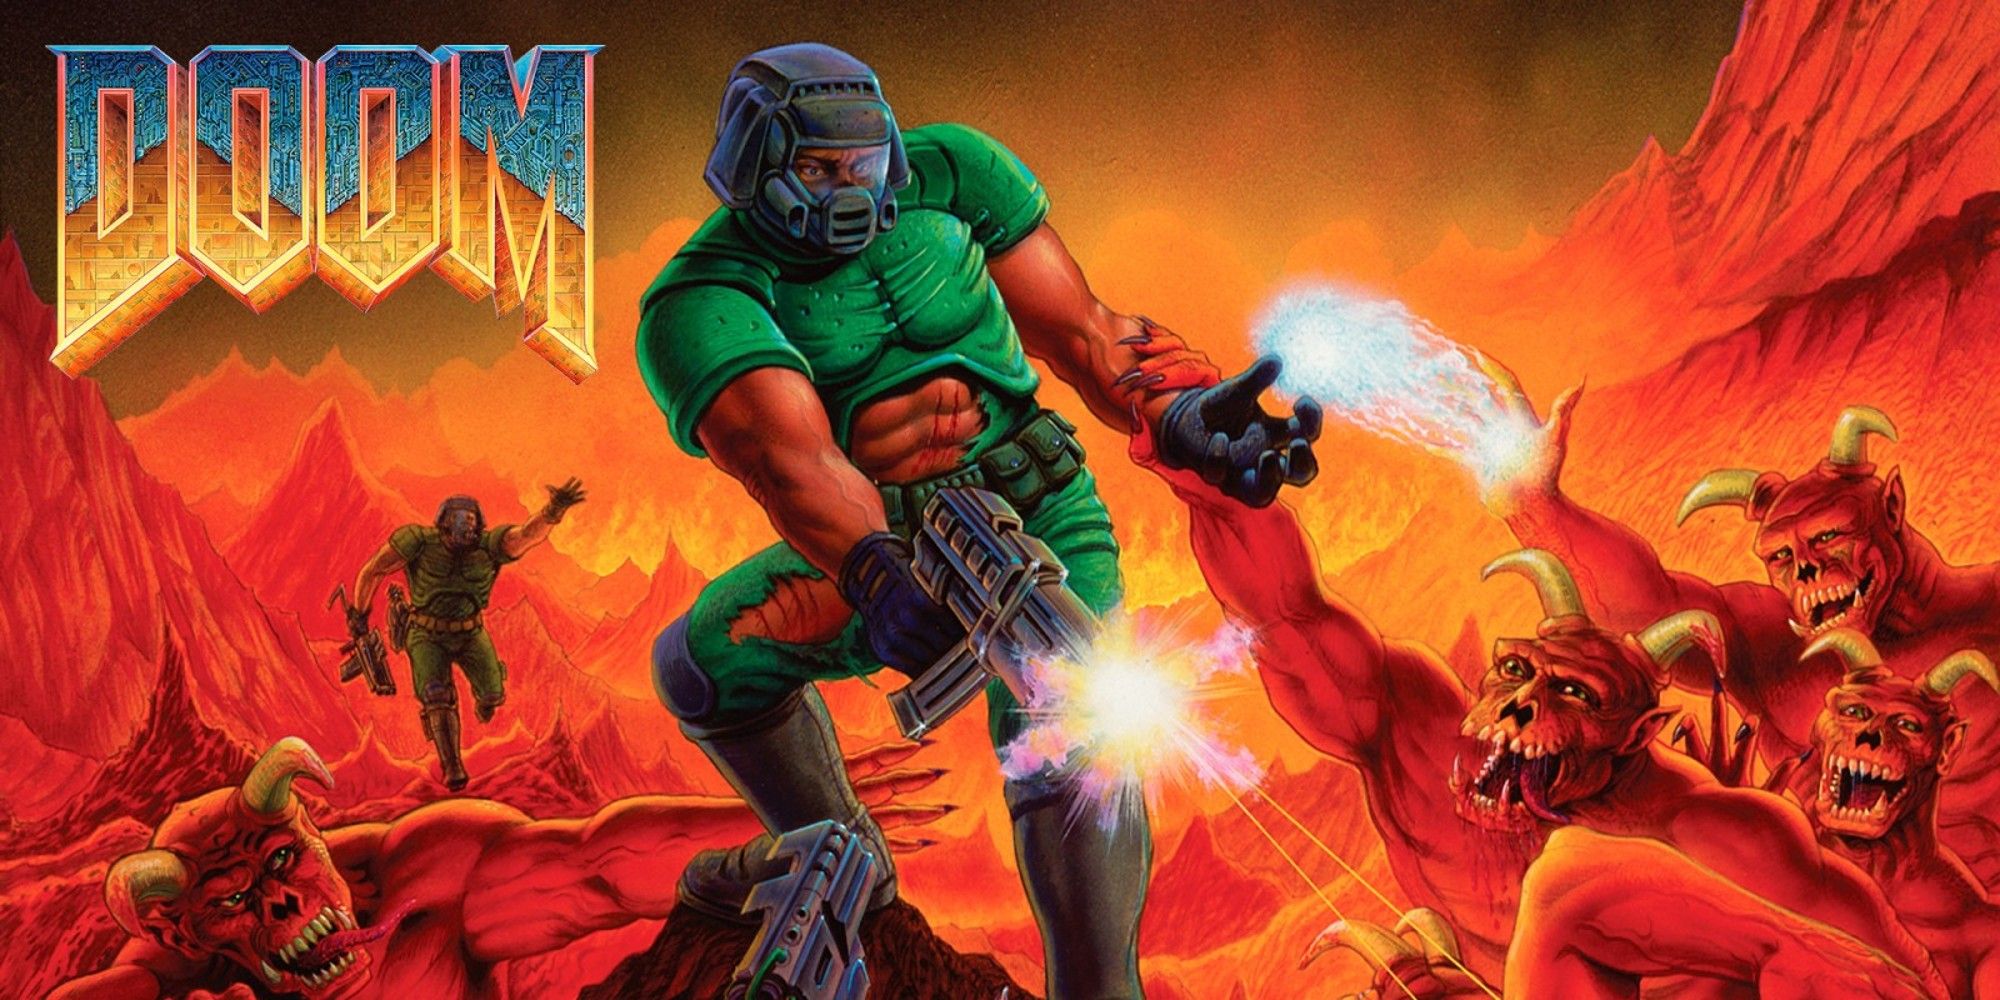 Doom Title Art cover with combat